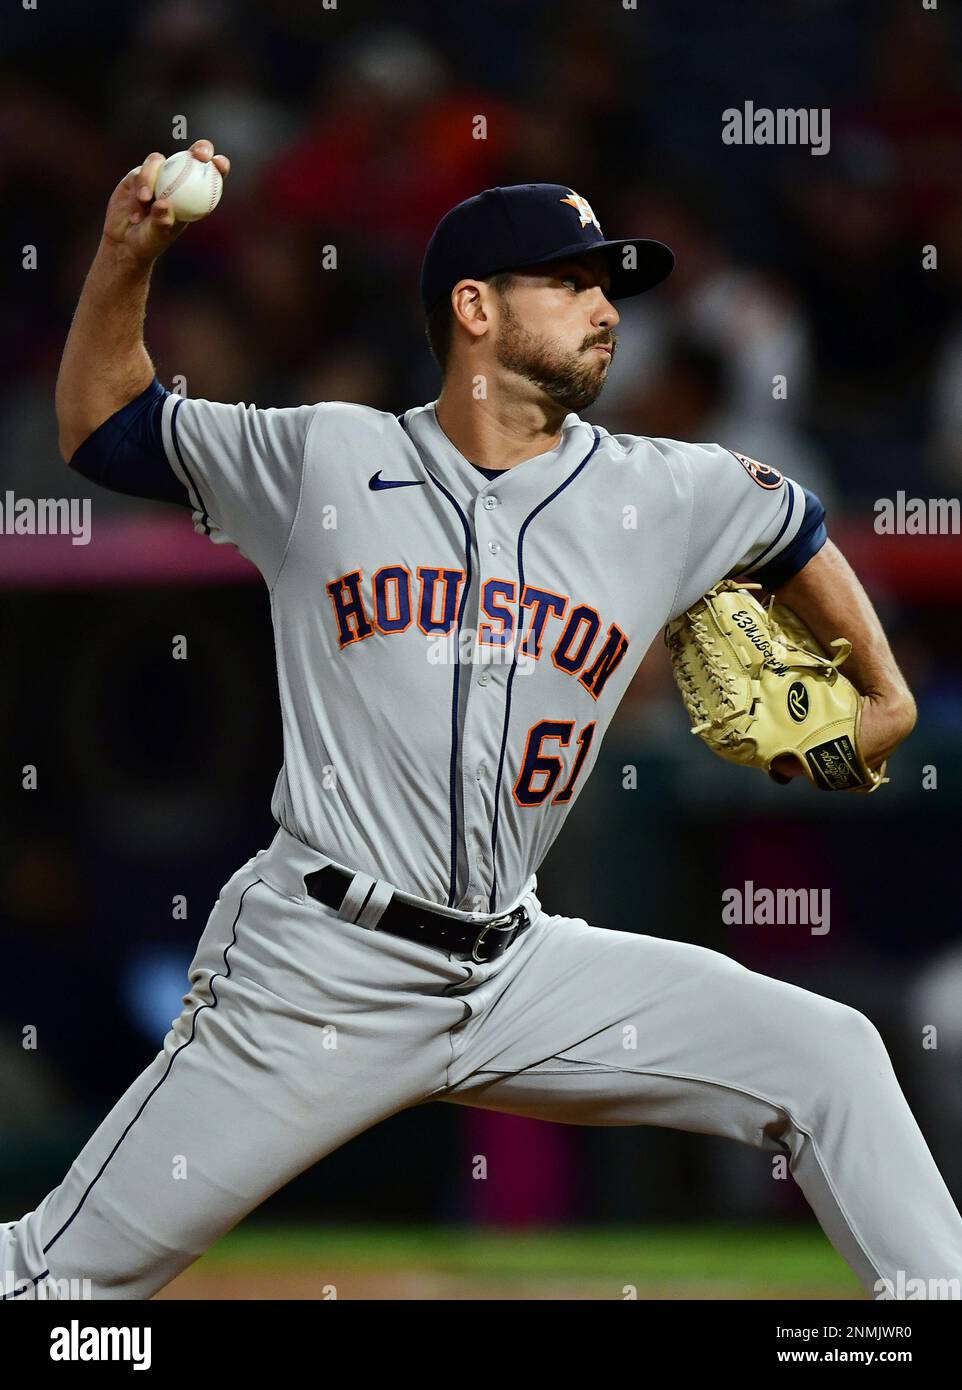 ANAHEIM, CA - SEPTEMBER 23: Houston Astros pitcher Forrest Whitley (61)  pitching during the eighth inning a game against the Los Angels Angels  played on September 23, 2021 at Angel Stadium in